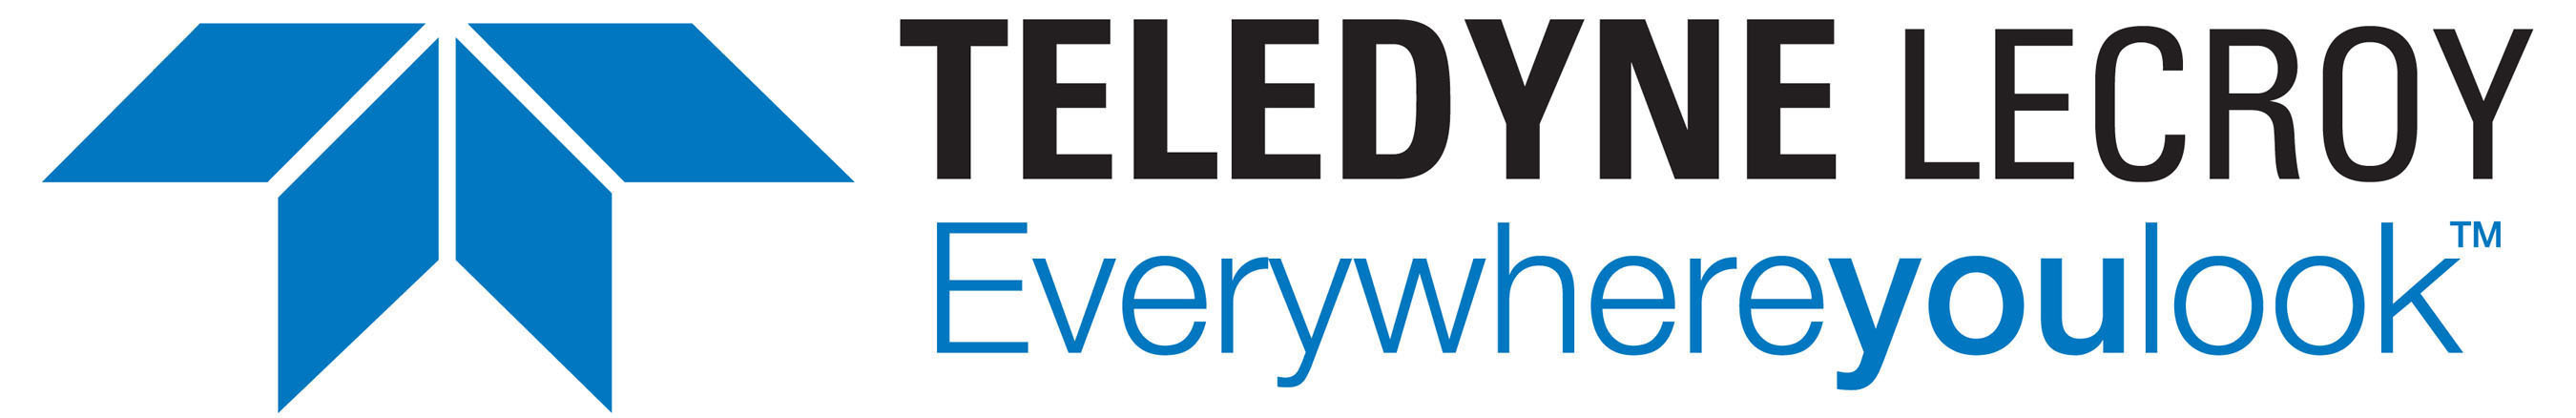 Teledyne LeCroy is a leading provider of oscilloscopes, protocol analyzers and related test and measurement solutions that enable companies across a wide range of industries to design and test electronic devices of all types. (PRNewsFoto/Teledyne LeCroy) (PRNewsFoto/Teledyne LeCroy)